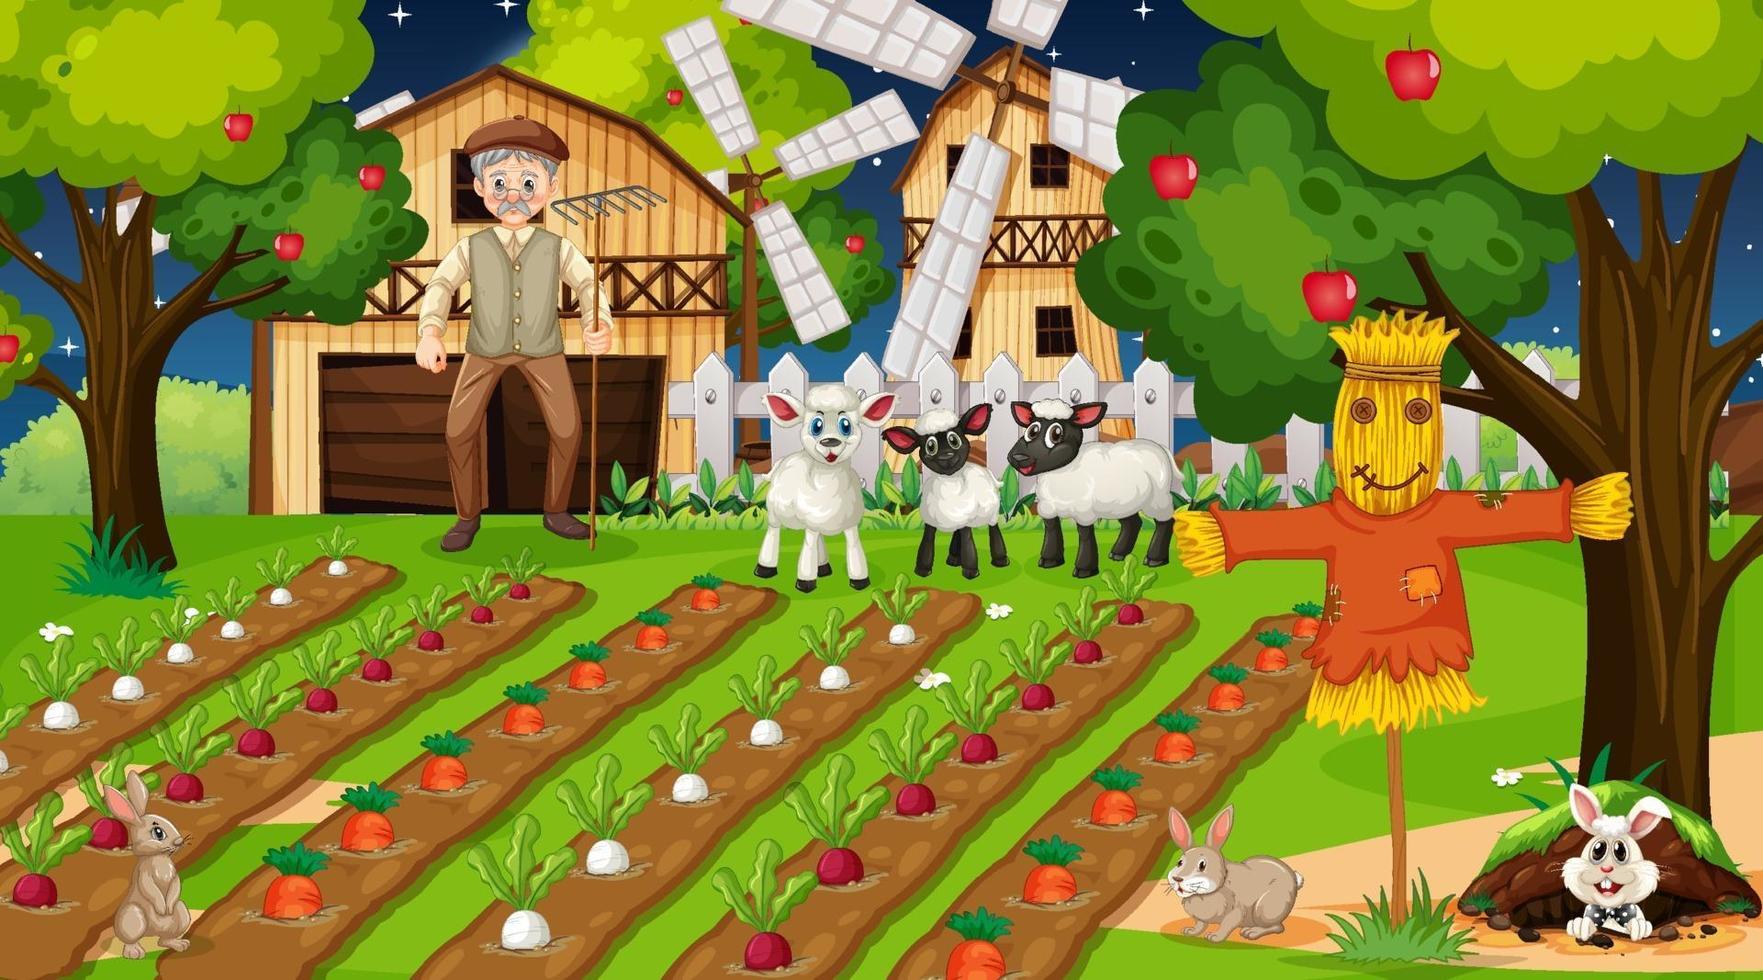 Farm scene at night with old farmer man and cute animals vector